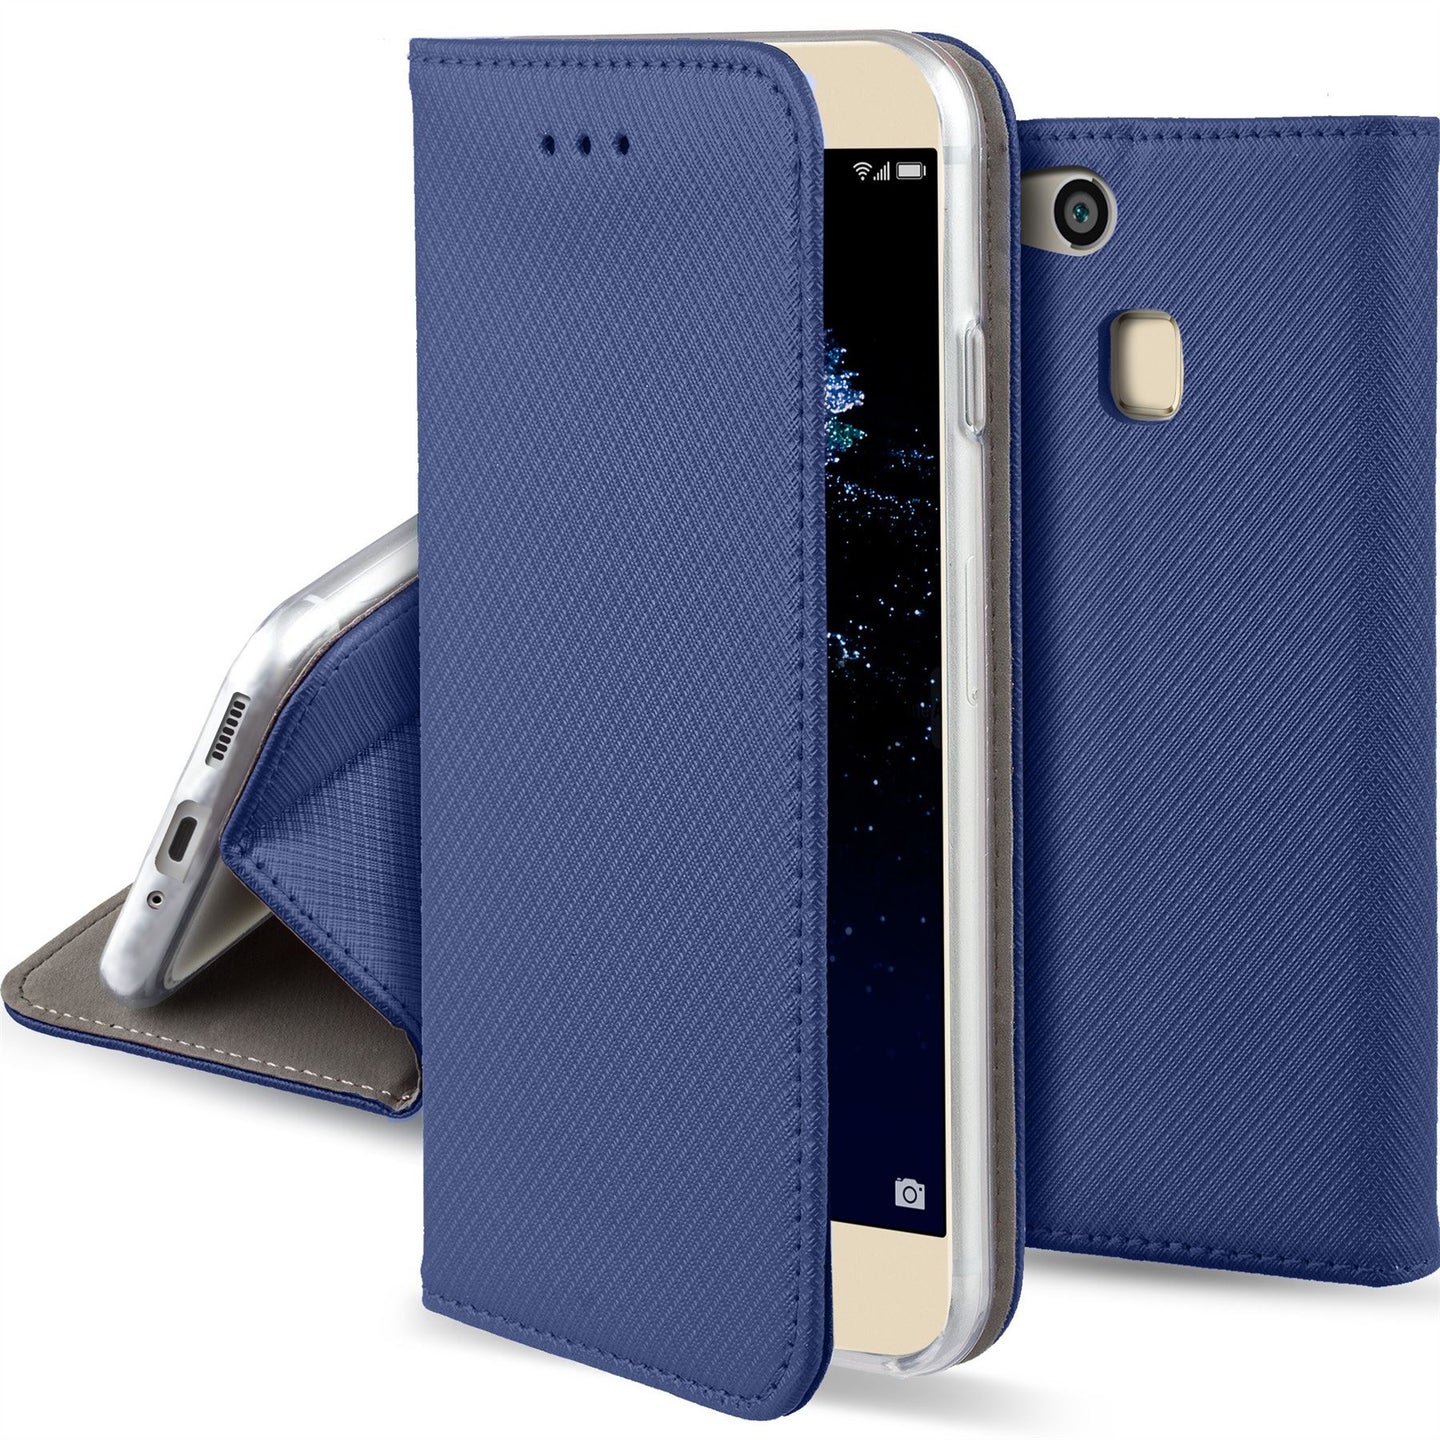 Moozy Case Flip Cover for Huawei P10 Lite, Dark Blue - Smart Magnetic Flip Case with Card Holder and Stand